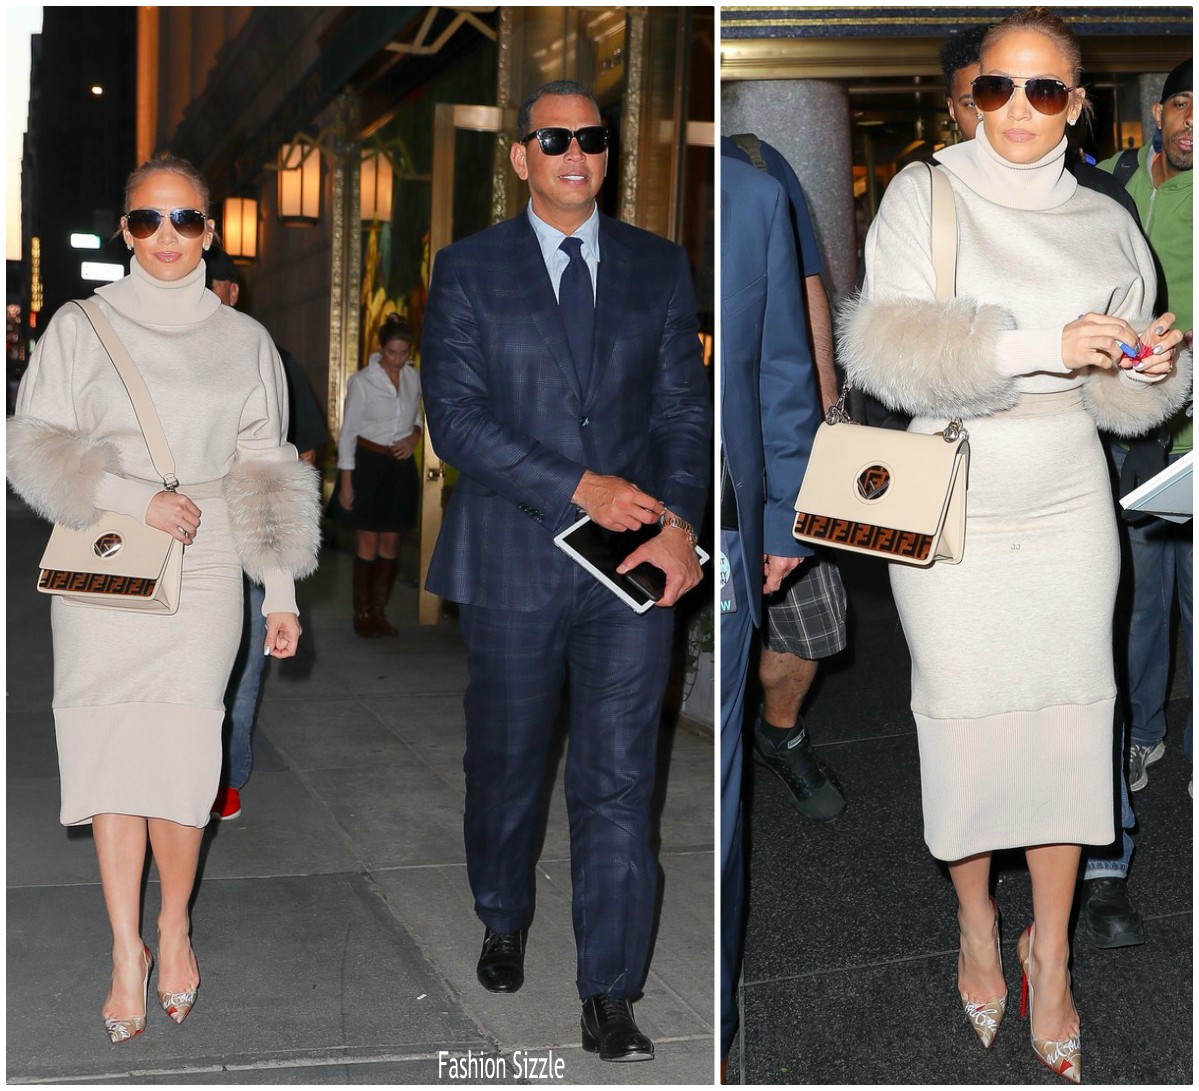 jennifer-lopez-in-sally-lapointe-dinner-at-the-polo-bar-in-new-york